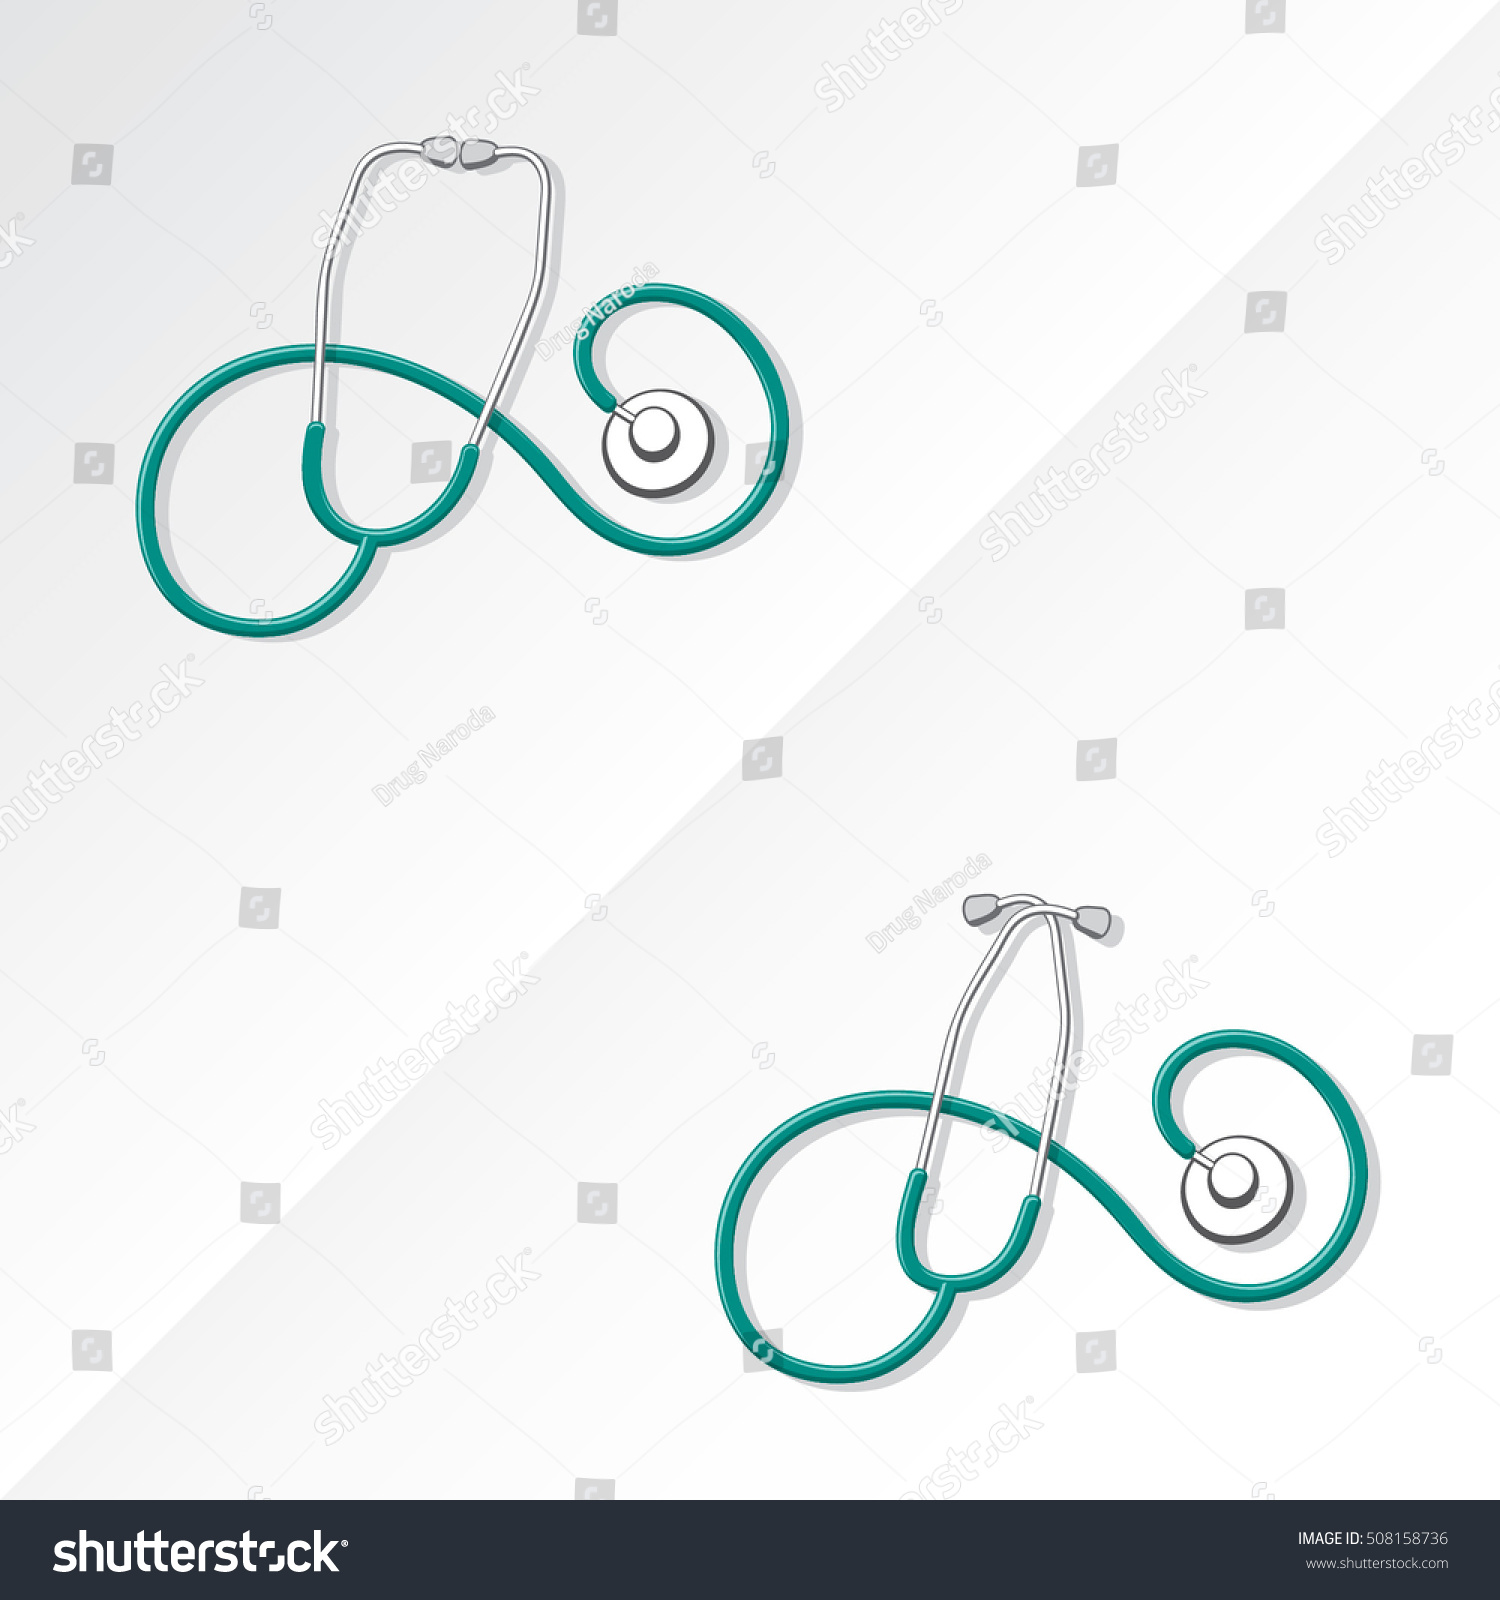 SVG of Two Medical Stethoscopes with Spiral Shape Tubing Icons Set One with Crossed Binaural Another with Eartips Put Together - Grayscale and Turquoise Objects on White Background - Realistic Flat Design svg